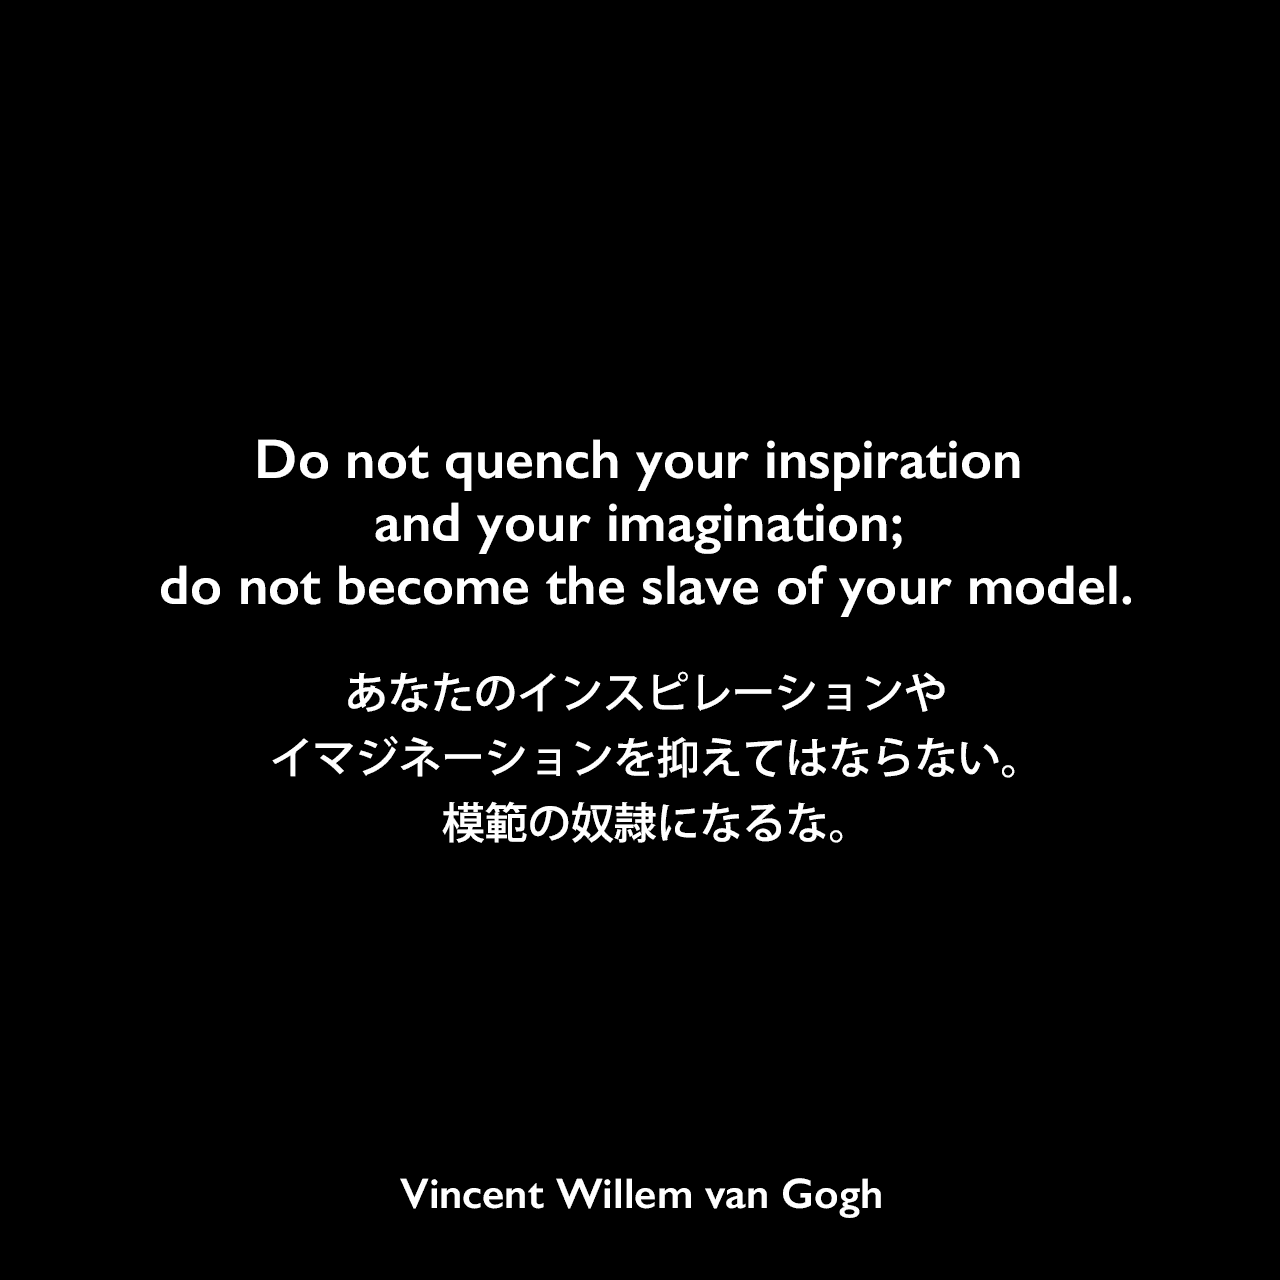 Do not quench your inspiration and your imagination; do not become the slave of your model.あなたのインスピレーションやイマジネーションを抑えてはならない。模範の奴隷になるな。Vincent Willem van Gogh